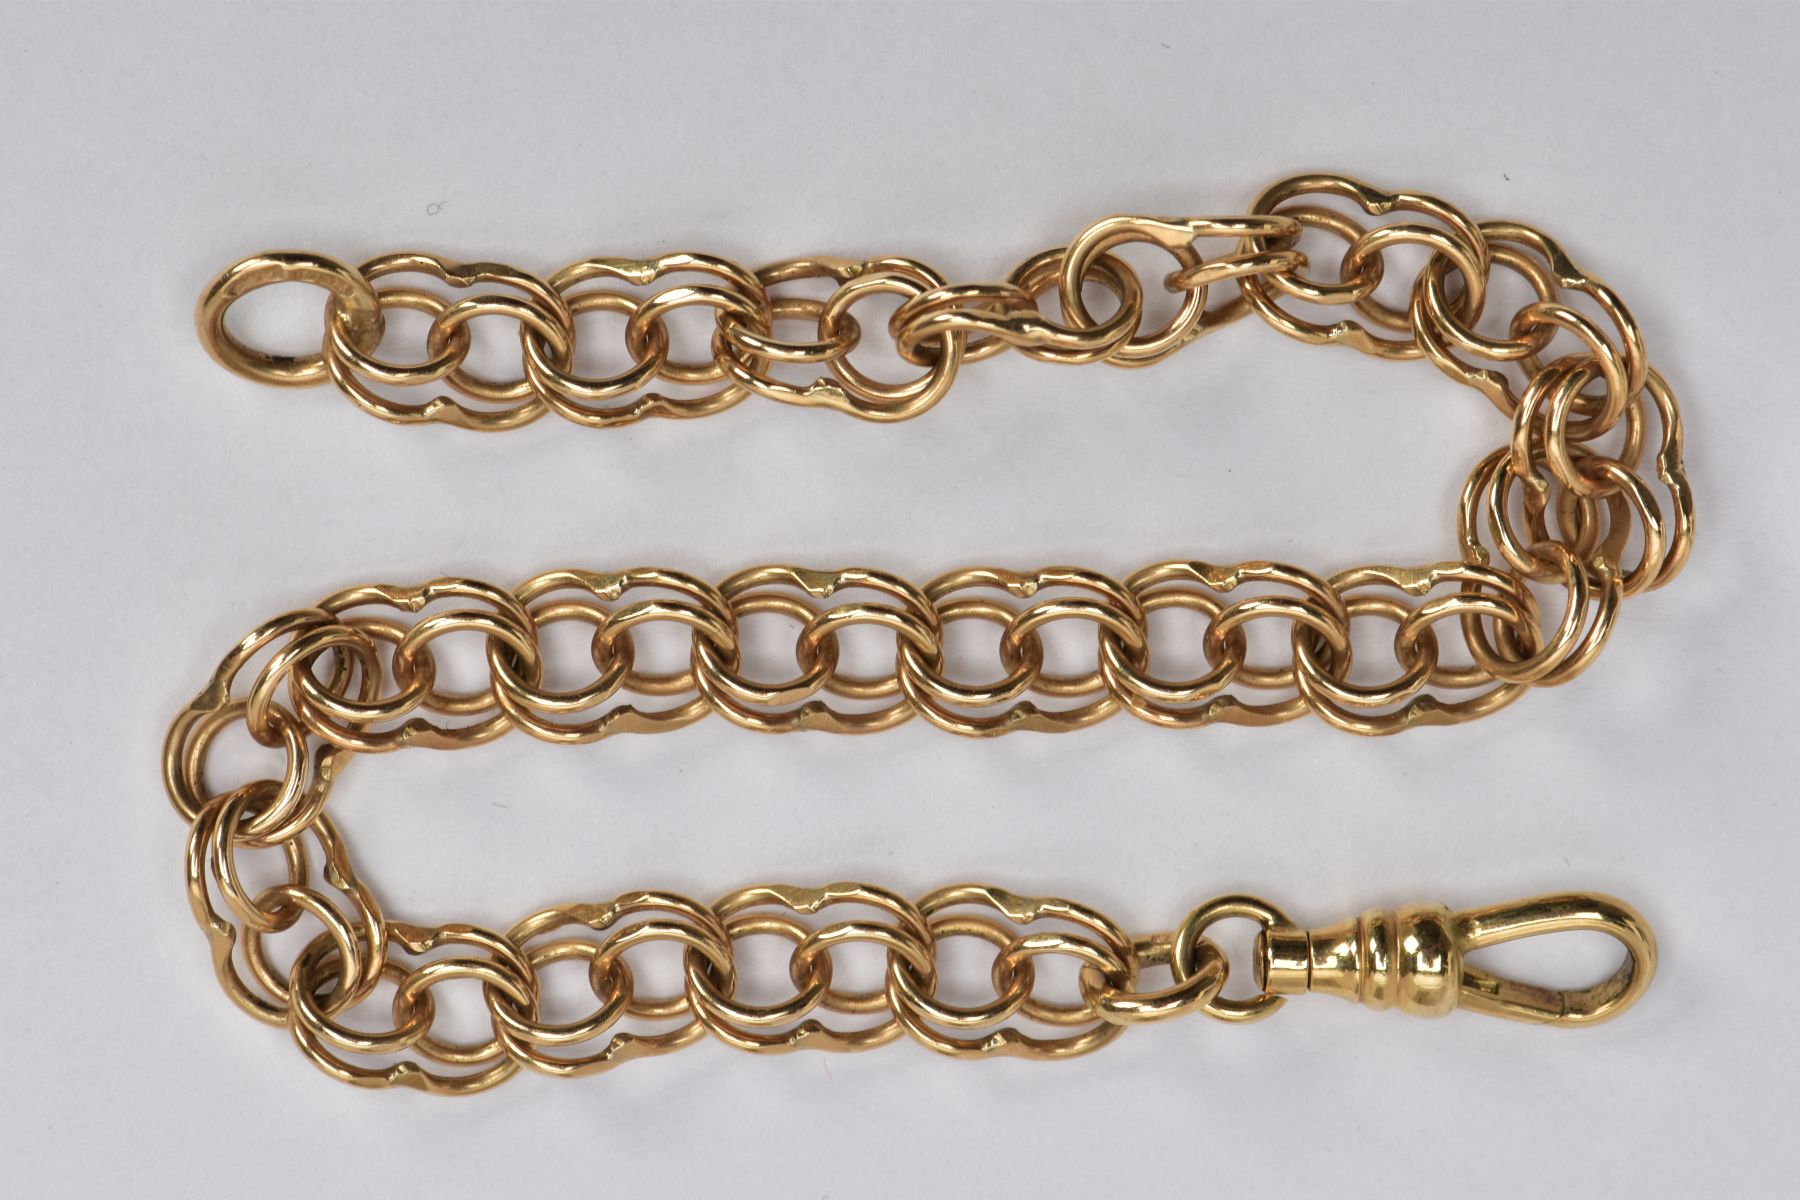 A 9CT GOLD DOUBLE LINK BRACELET, hallmarked 9ct gold slightly rubbed hallmark, fitted with a - Image 2 of 2